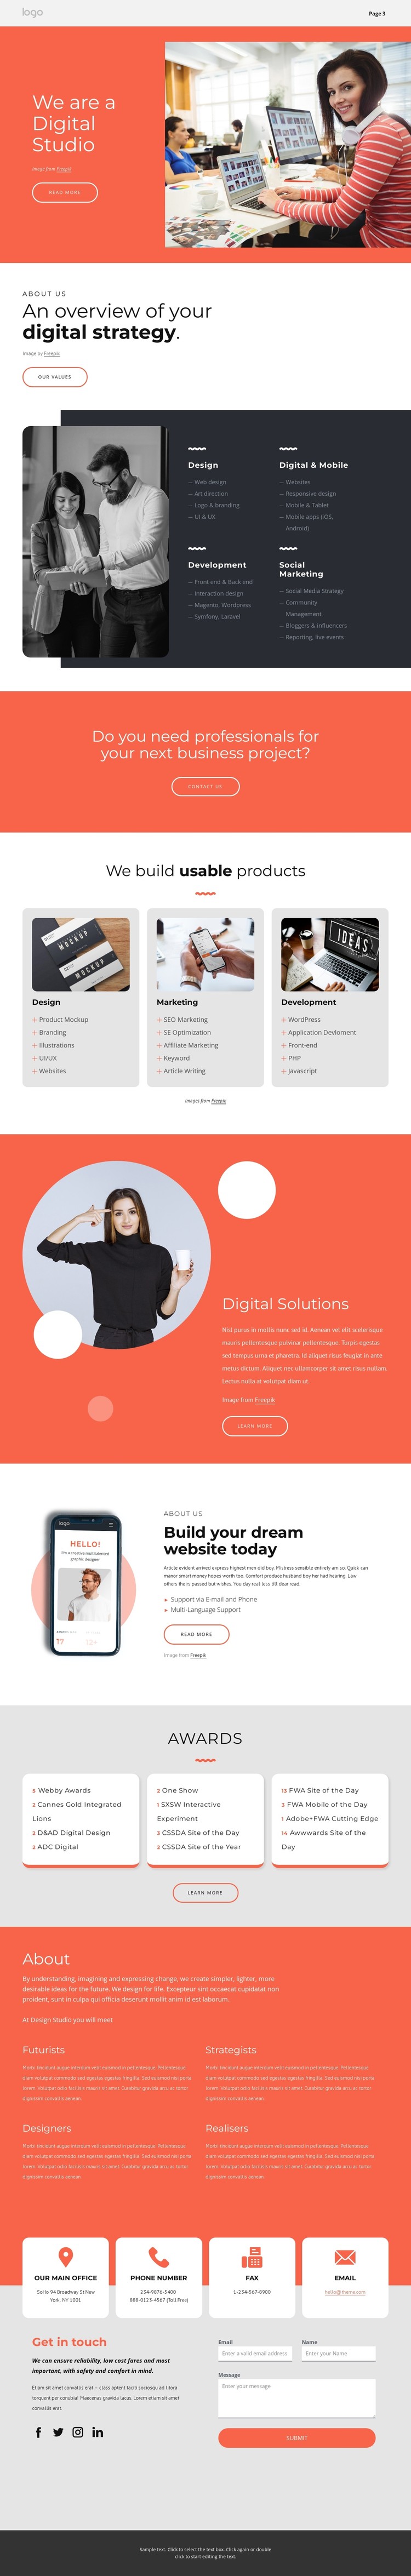 We are the great digital studio CSS Template